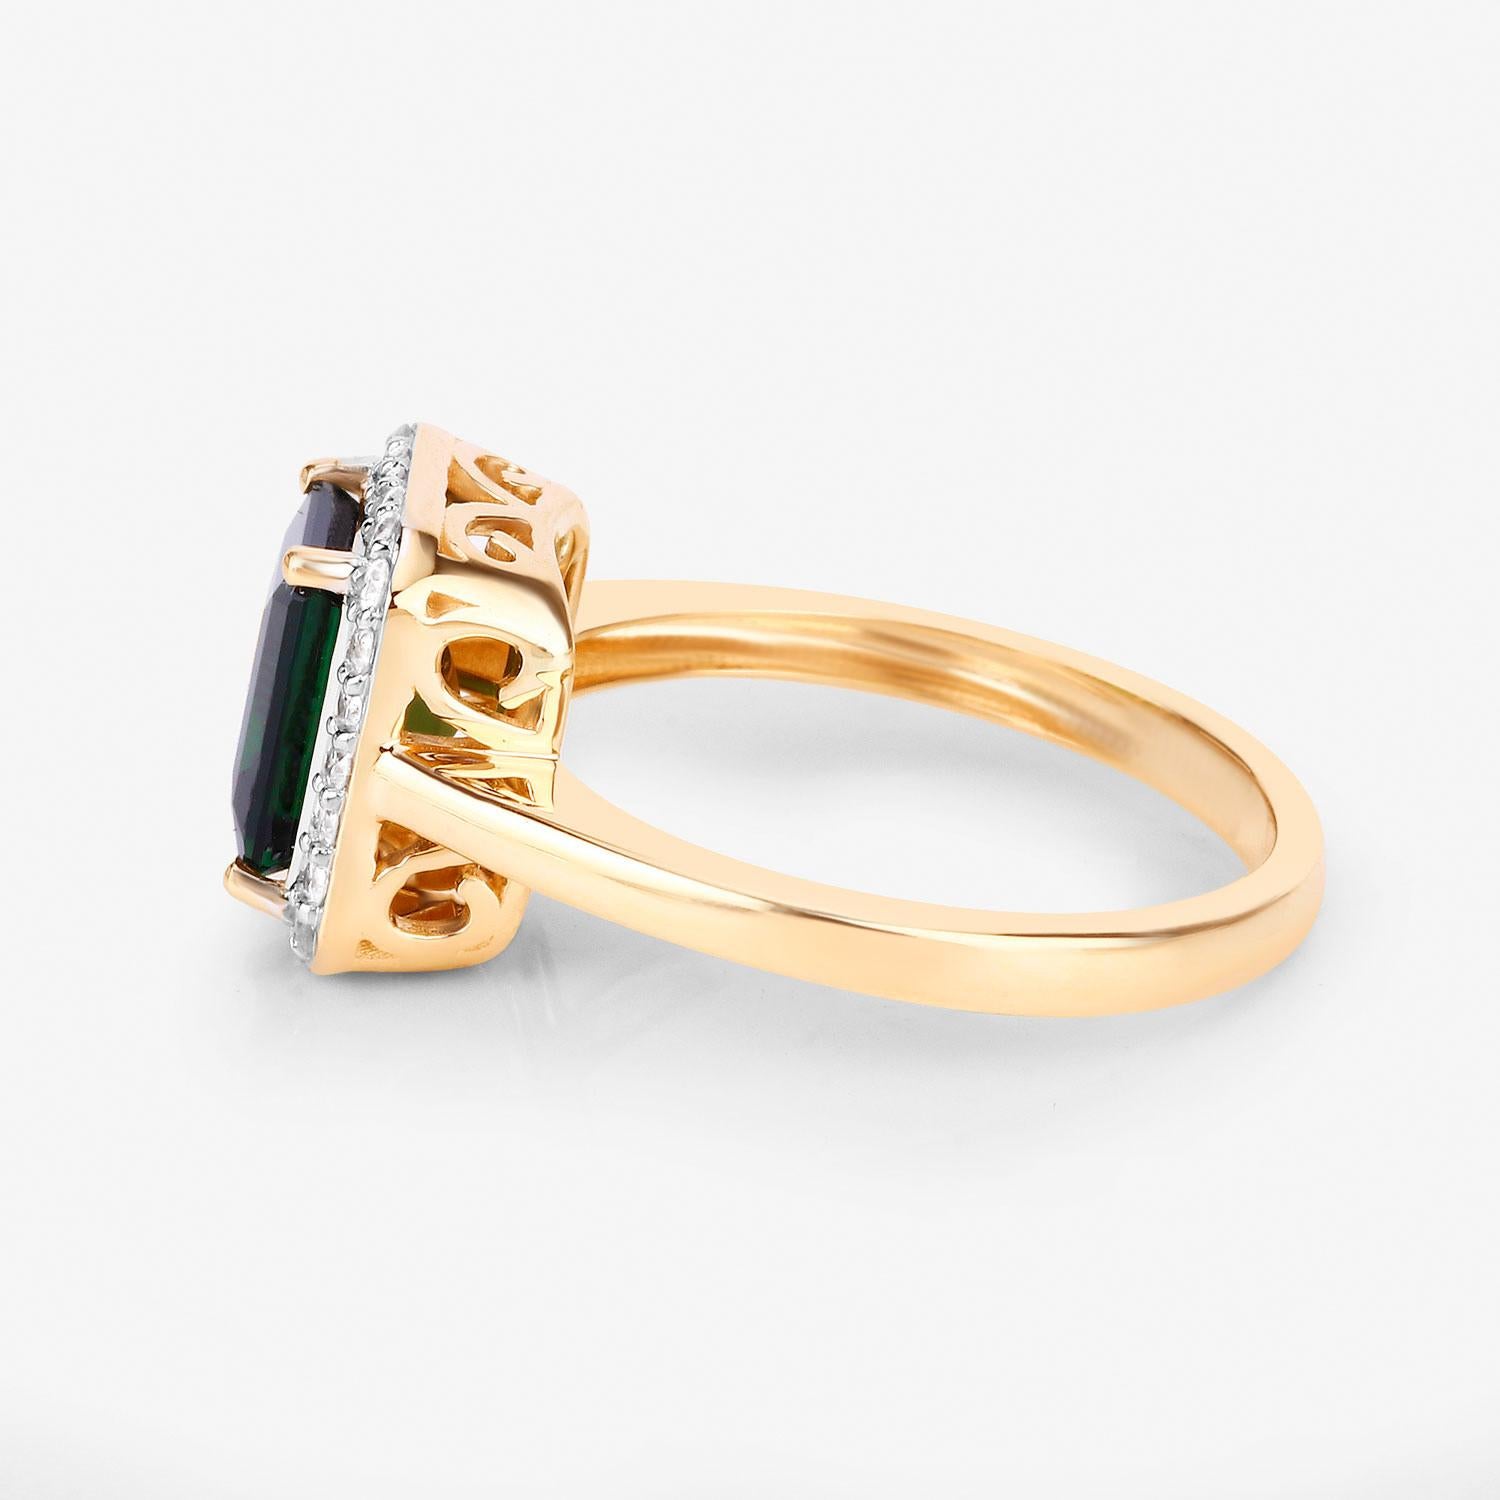 Green Tourmaline Ring With Diamonds 3.02 Carats 14K Yellow Gold In Excellent Condition For Sale In Laguna Niguel, CA